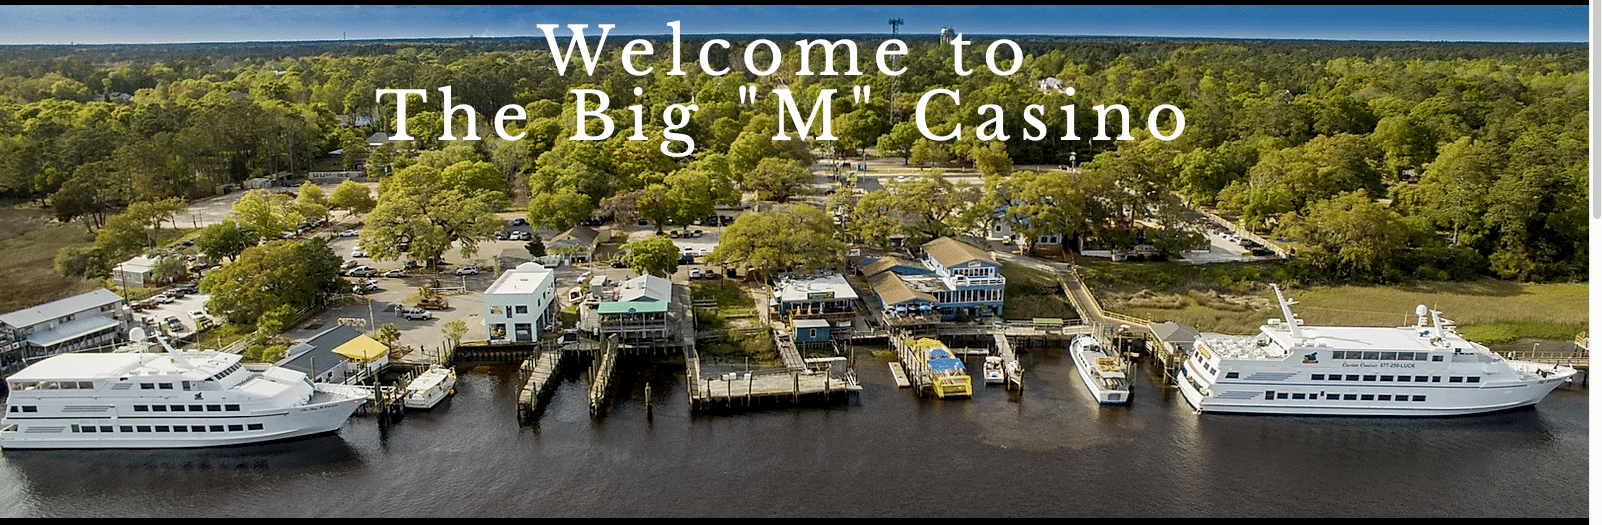 Aerial View of the Big M Casino Boats